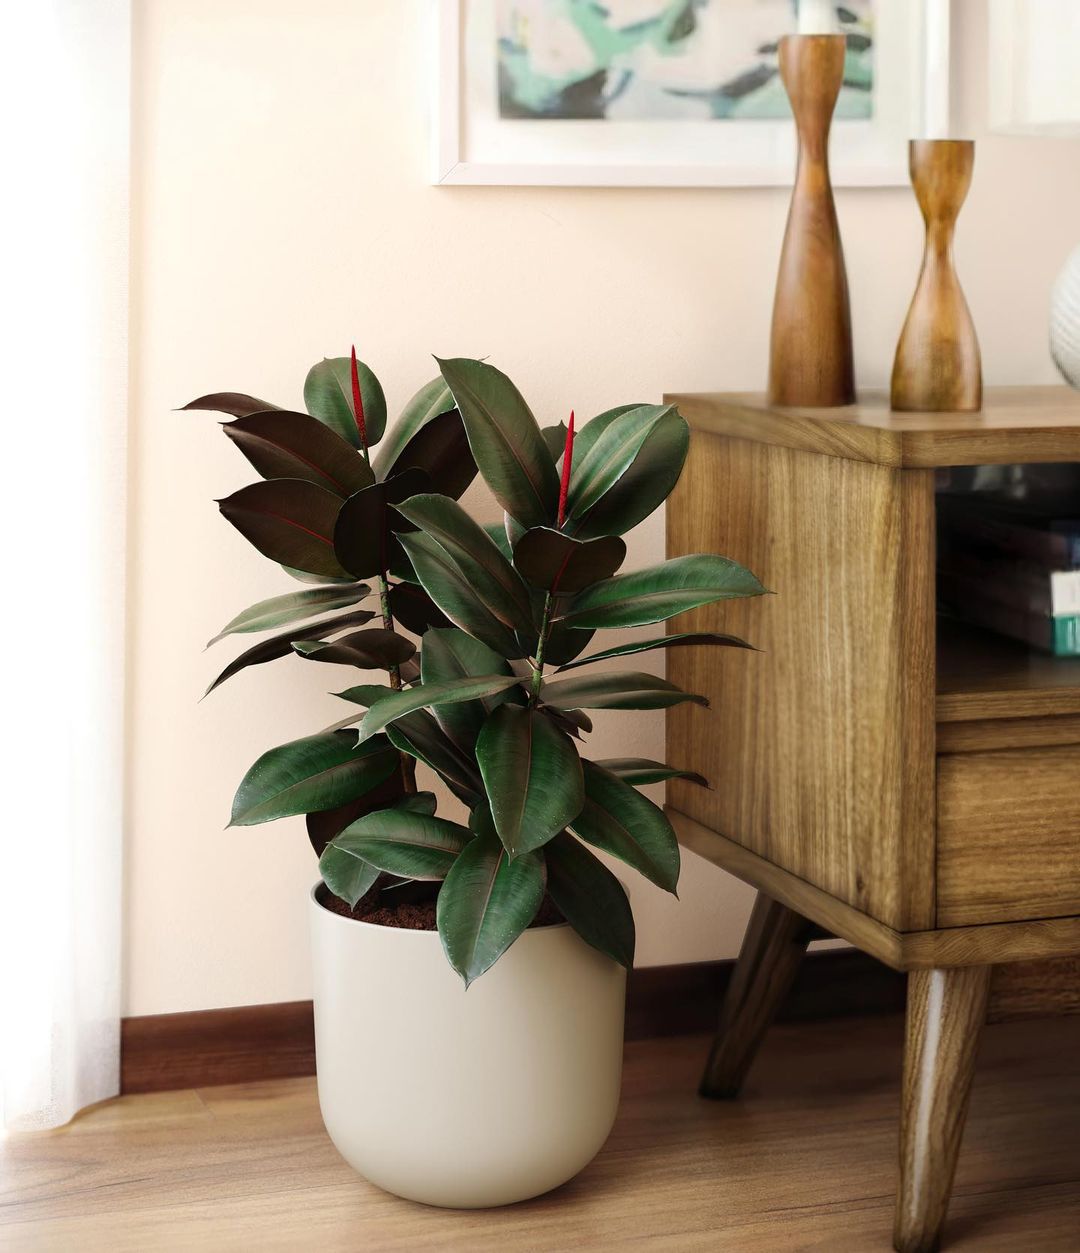 Revive Your Dying Plants: The Expert Guide To Saving Your Indoor Garden